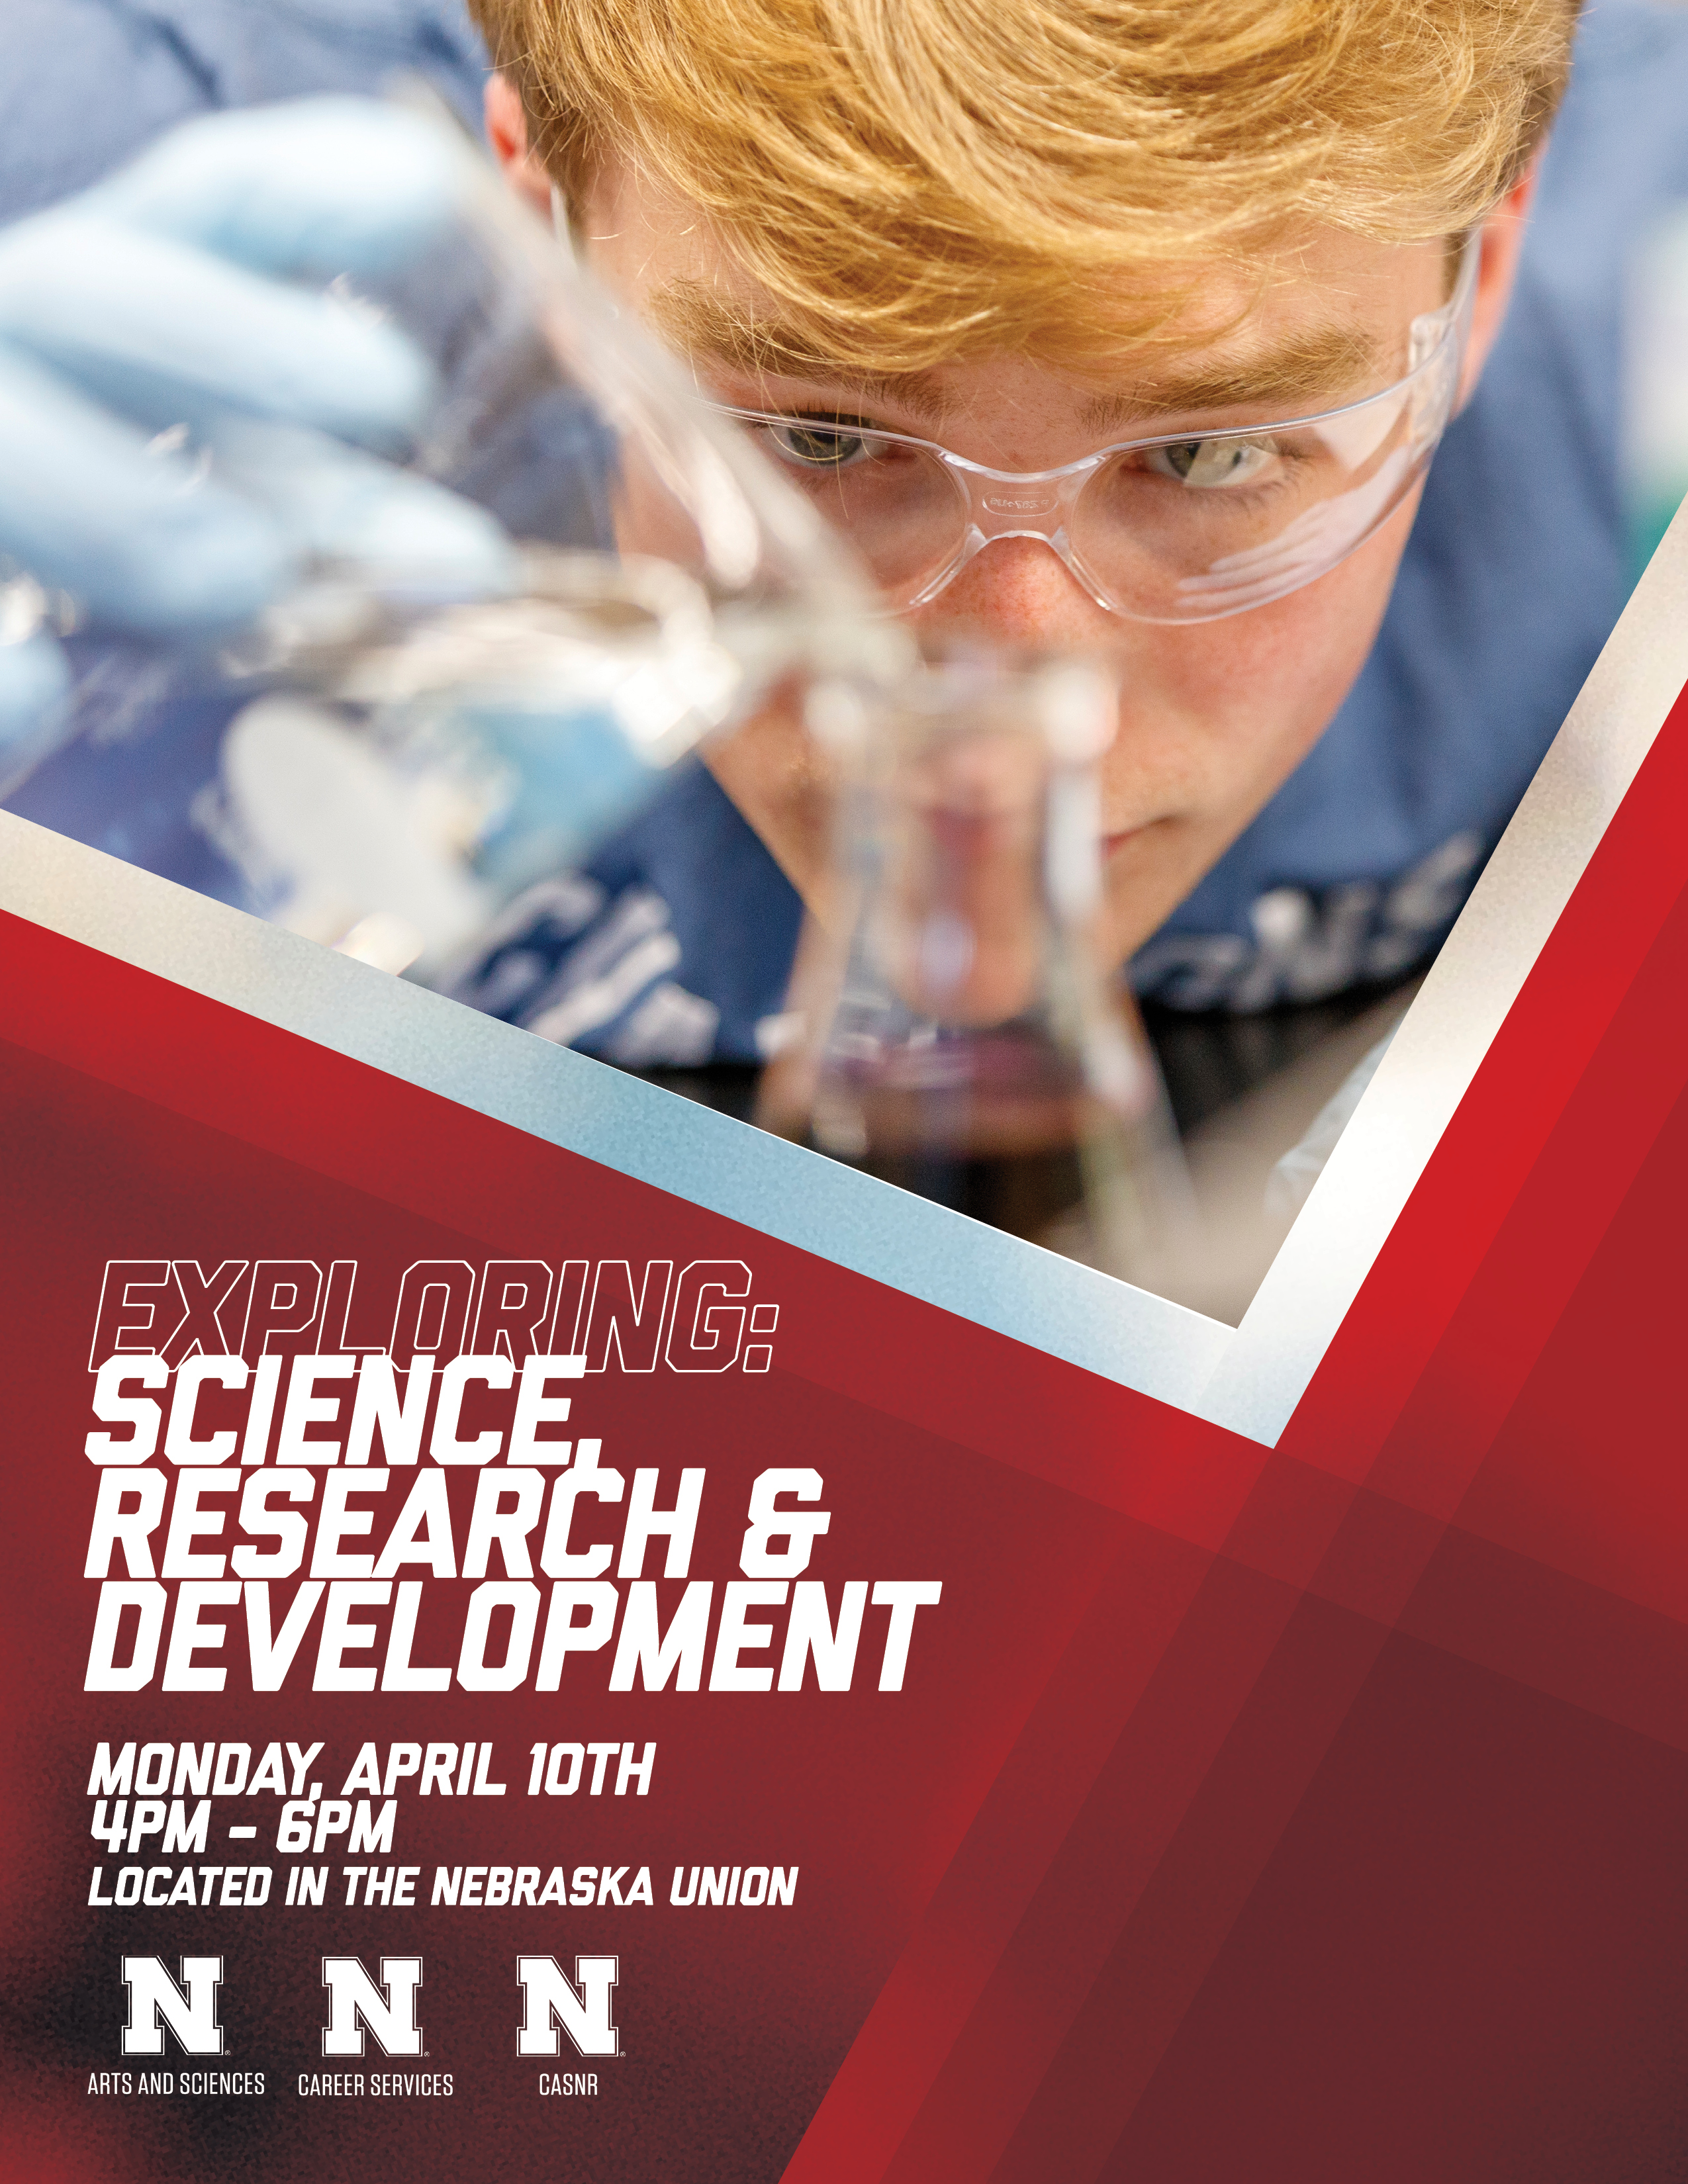 Exploring: Science, Research and Development Pathways is on April 10 from 4-5:30 p.m.